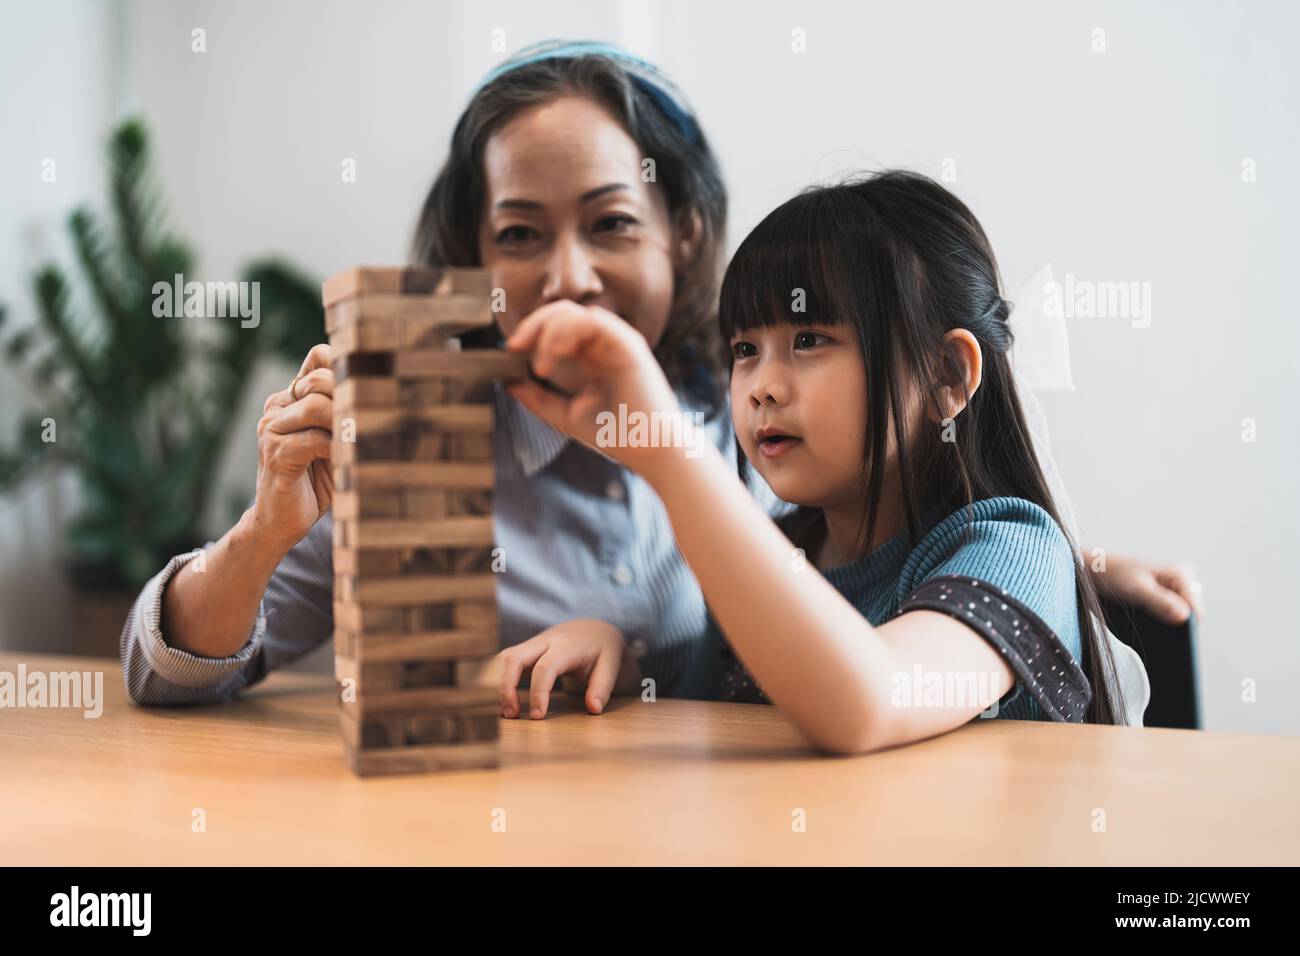 Happy moments of Asian grandmother with her granddaughter playing jenga constructor. Leisure activities for children at home. Stock Photo